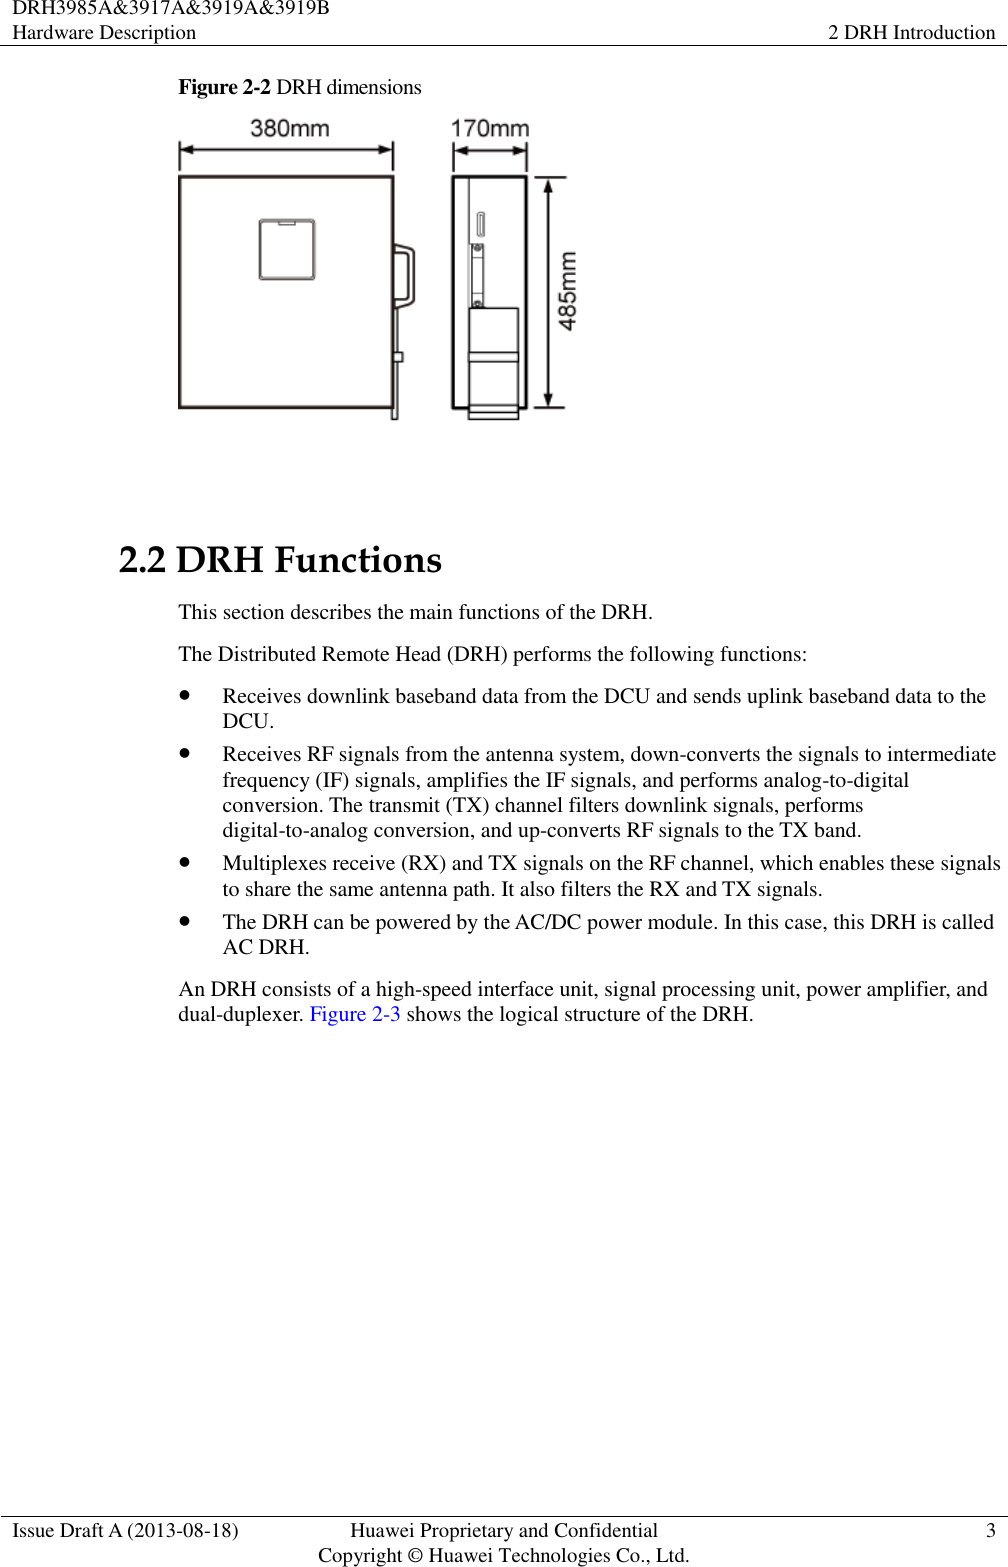 DRH3985A&amp;3917A&amp;3919A&amp;3919B Hardware Description 2 DRH Introduction  Issue Draft A (2013-08-18) Huawei Proprietary and Confidential                                     Copyright © Huawei Technologies Co., Ltd. 3  Figure 2-2  DRH dimensions   2.2 DRH Functions This section describes the main functions of the DRH. The Distributed Remote Head (DRH) performs the following functions:  Receives downlink baseband data from the DCU and sends uplink baseband data to the DCU.  Receives RF signals from the antenna system, down-converts the signals to intermediate frequency (IF) signals, amplifies the IF signals, and performs analog-to-digital conversion. The transmit (TX) channel filters downlink signals, performs digital-to-analog conversion, and up-converts RF signals to the TX band.  Multiplexes receive (RX) and TX signals on the RF channel, which enables these signals to share the same antenna path. It also filters the RX and TX signals.  The DRH can be powered by the AC/DC power module. In this case, this DRH is called AC DRH. An DRH consists of a high-speed interface unit, signal processing unit, power amplifier, and dual-duplexer. Figure 2-3 shows the logical structure of the DRH.   